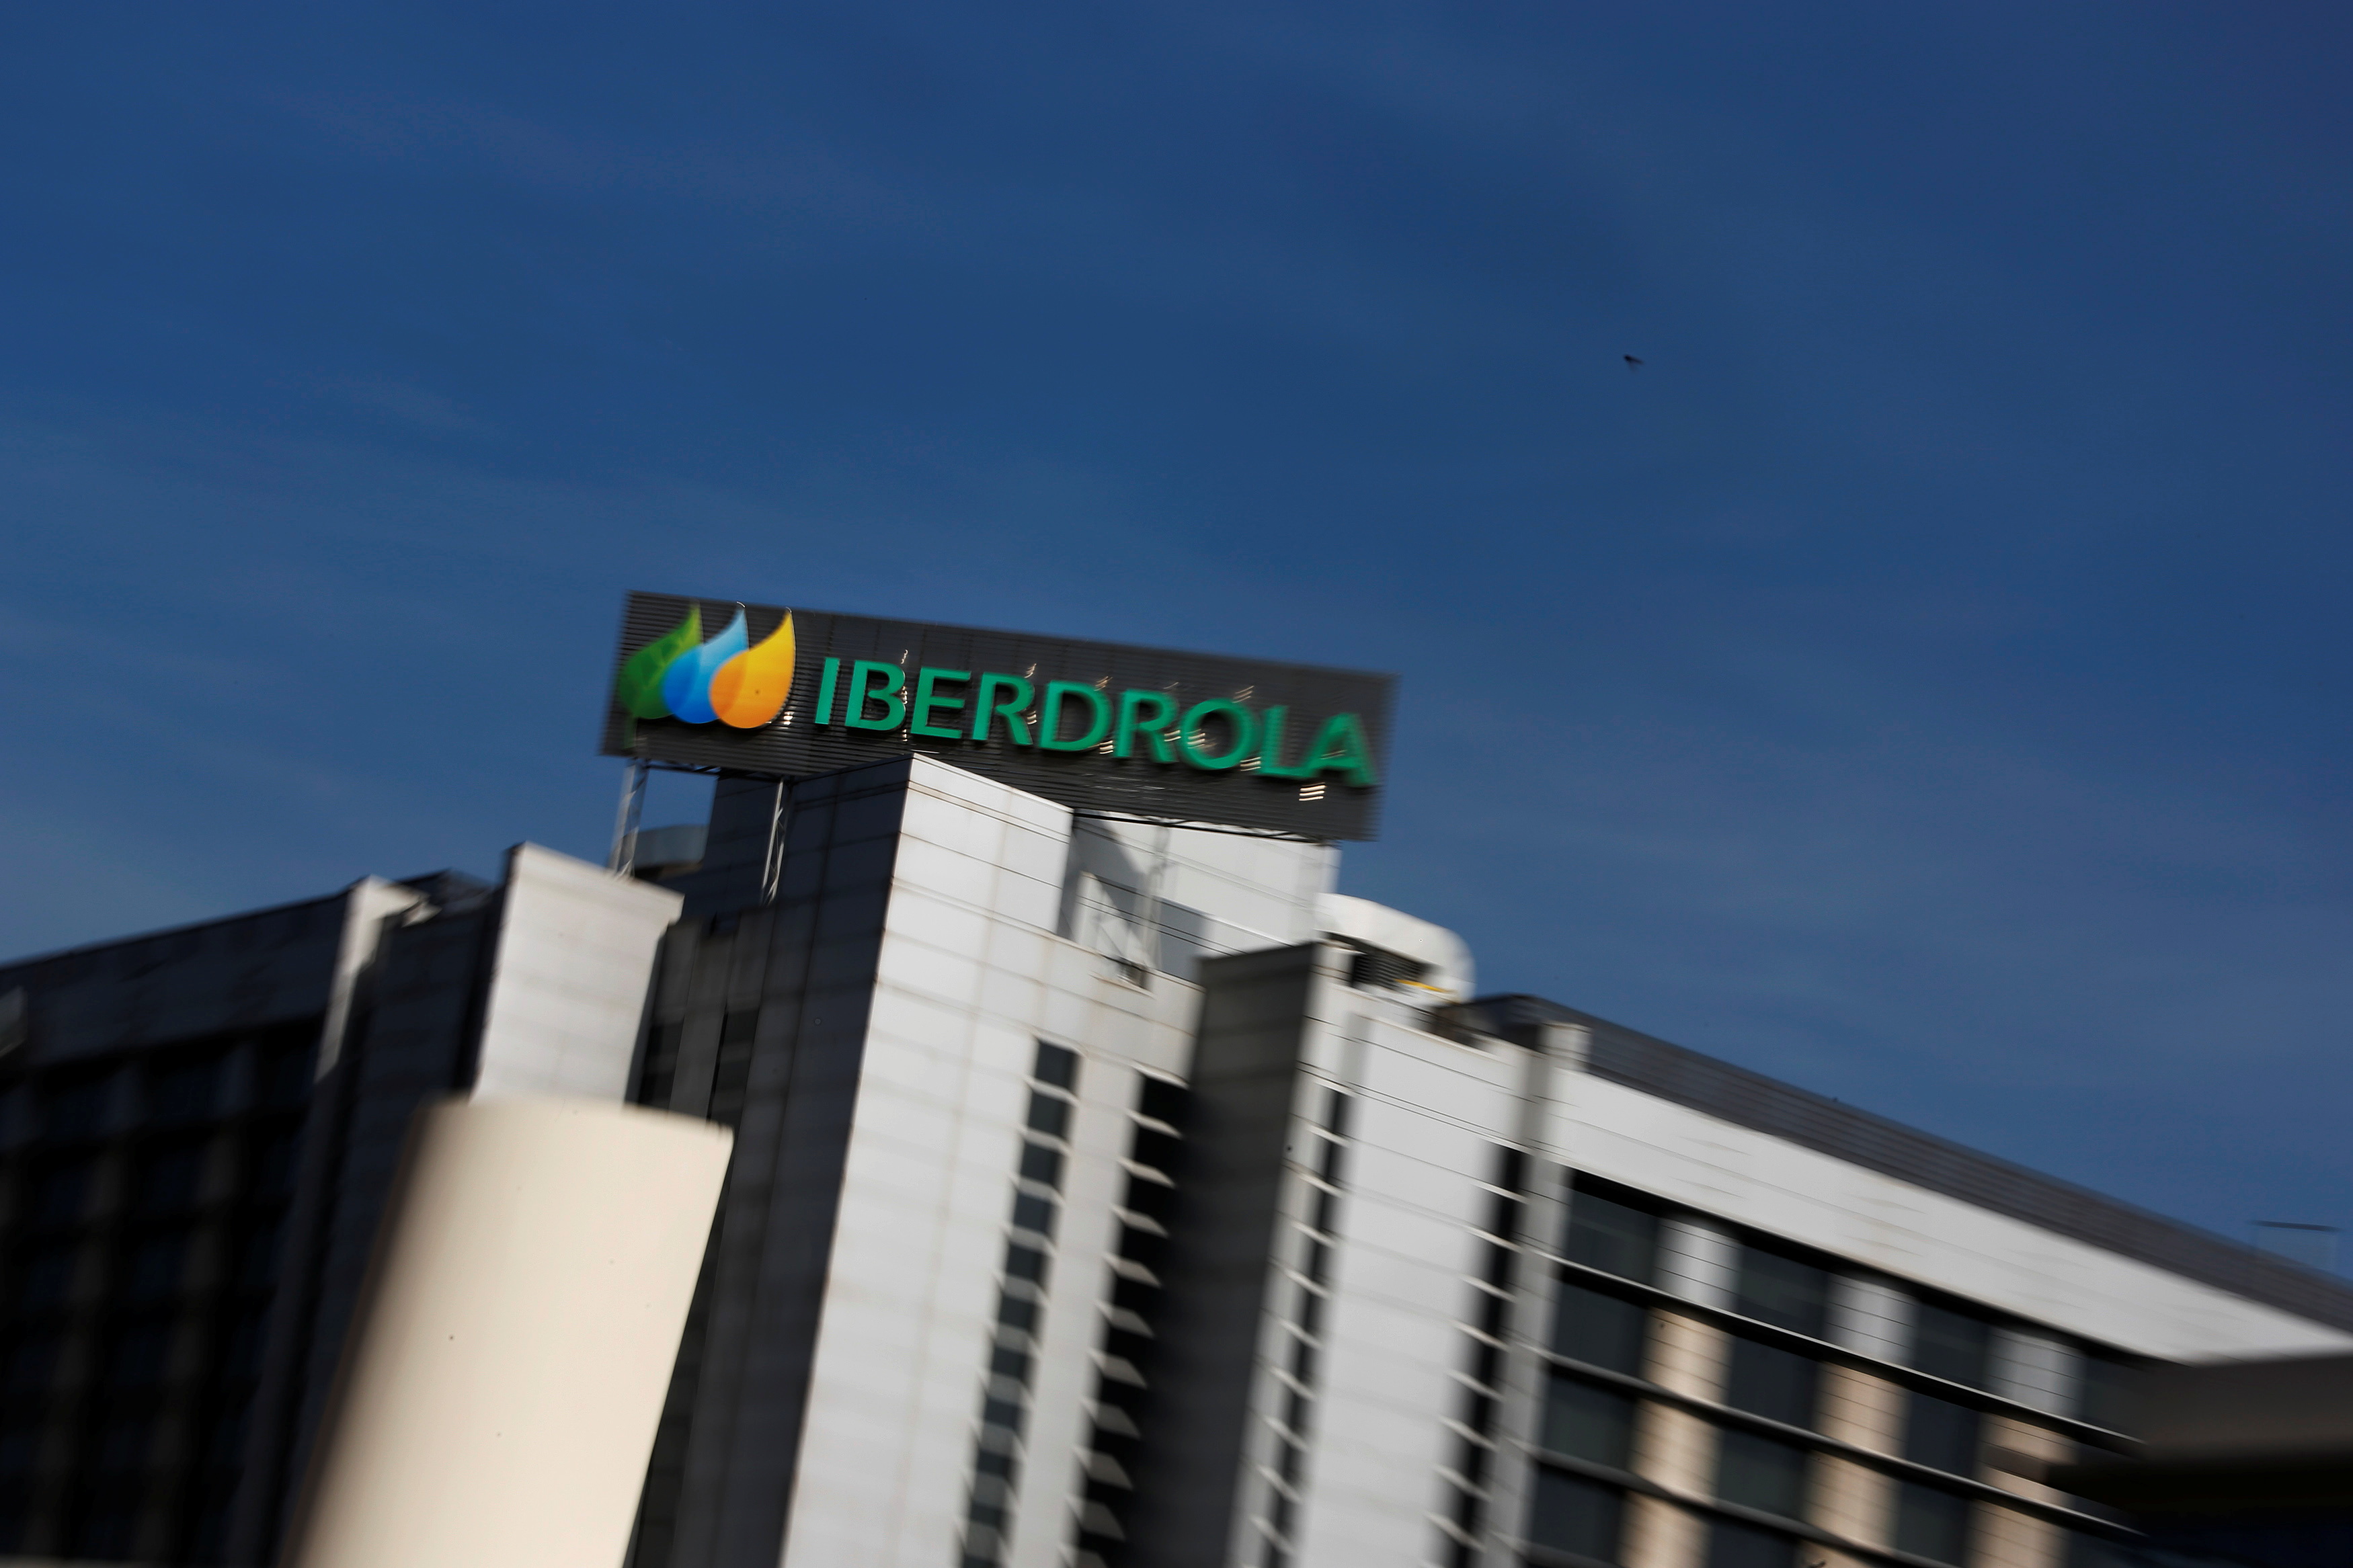 The logo of Spanish power company Iberdrola is seen on top of Iberdrola's main office building in Madrid